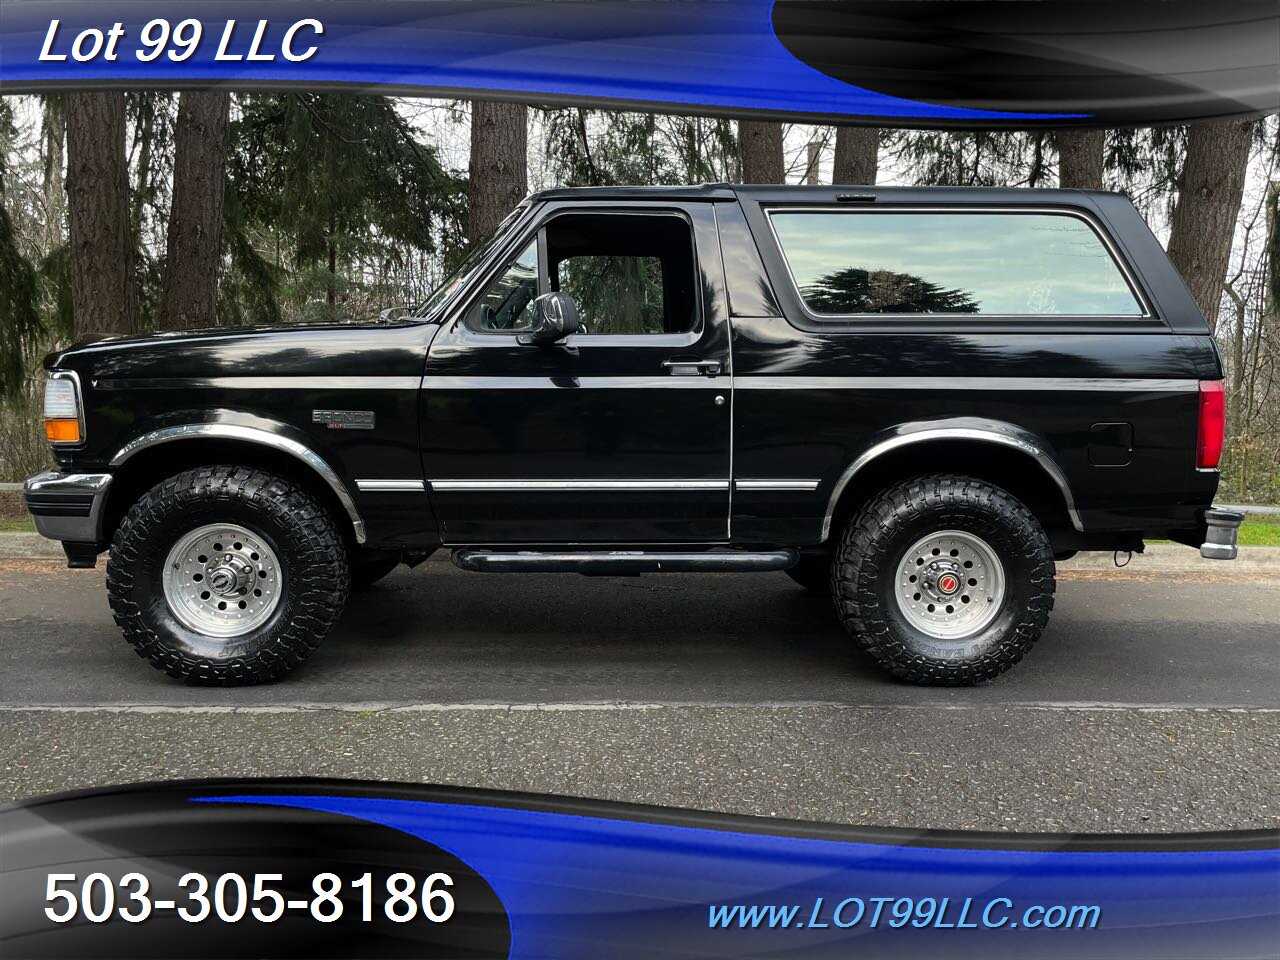 1993 Ford Bronco XLT 4x4 5.8L V8 New 33 " Tires and Carpet KIT   - Photo 1 - Milwaukie, OR 97267